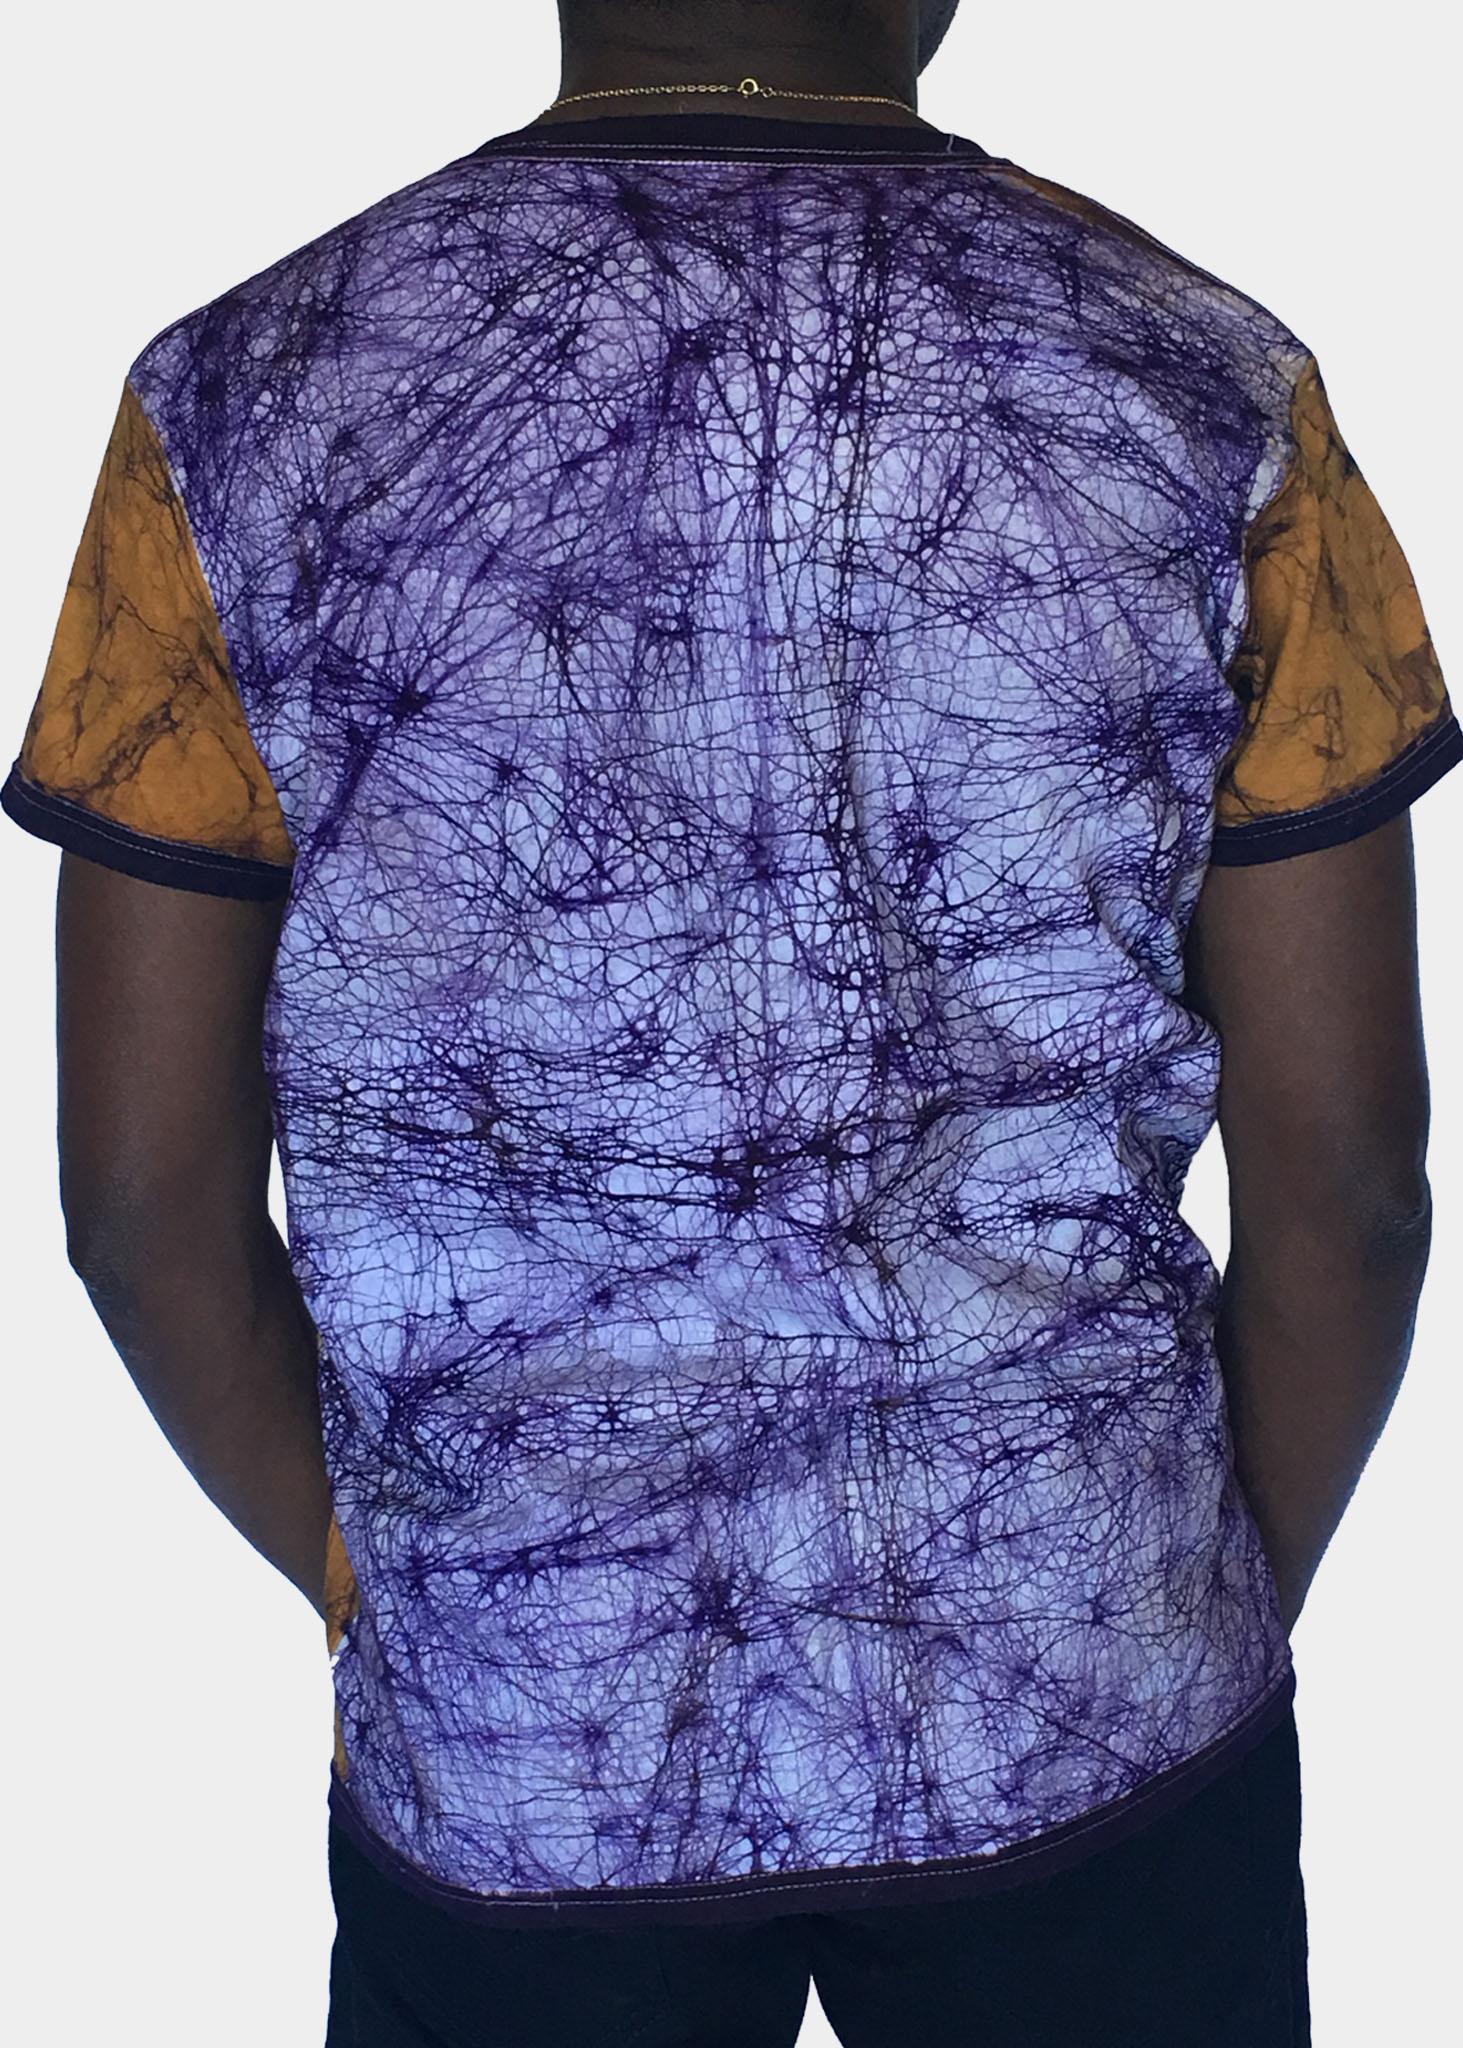 Gold and Purple Fitted Short Sleeves Batik T-shirt with Adinkra Symbols- Contemporary and Colorful Ensemble-African apparel and accessories